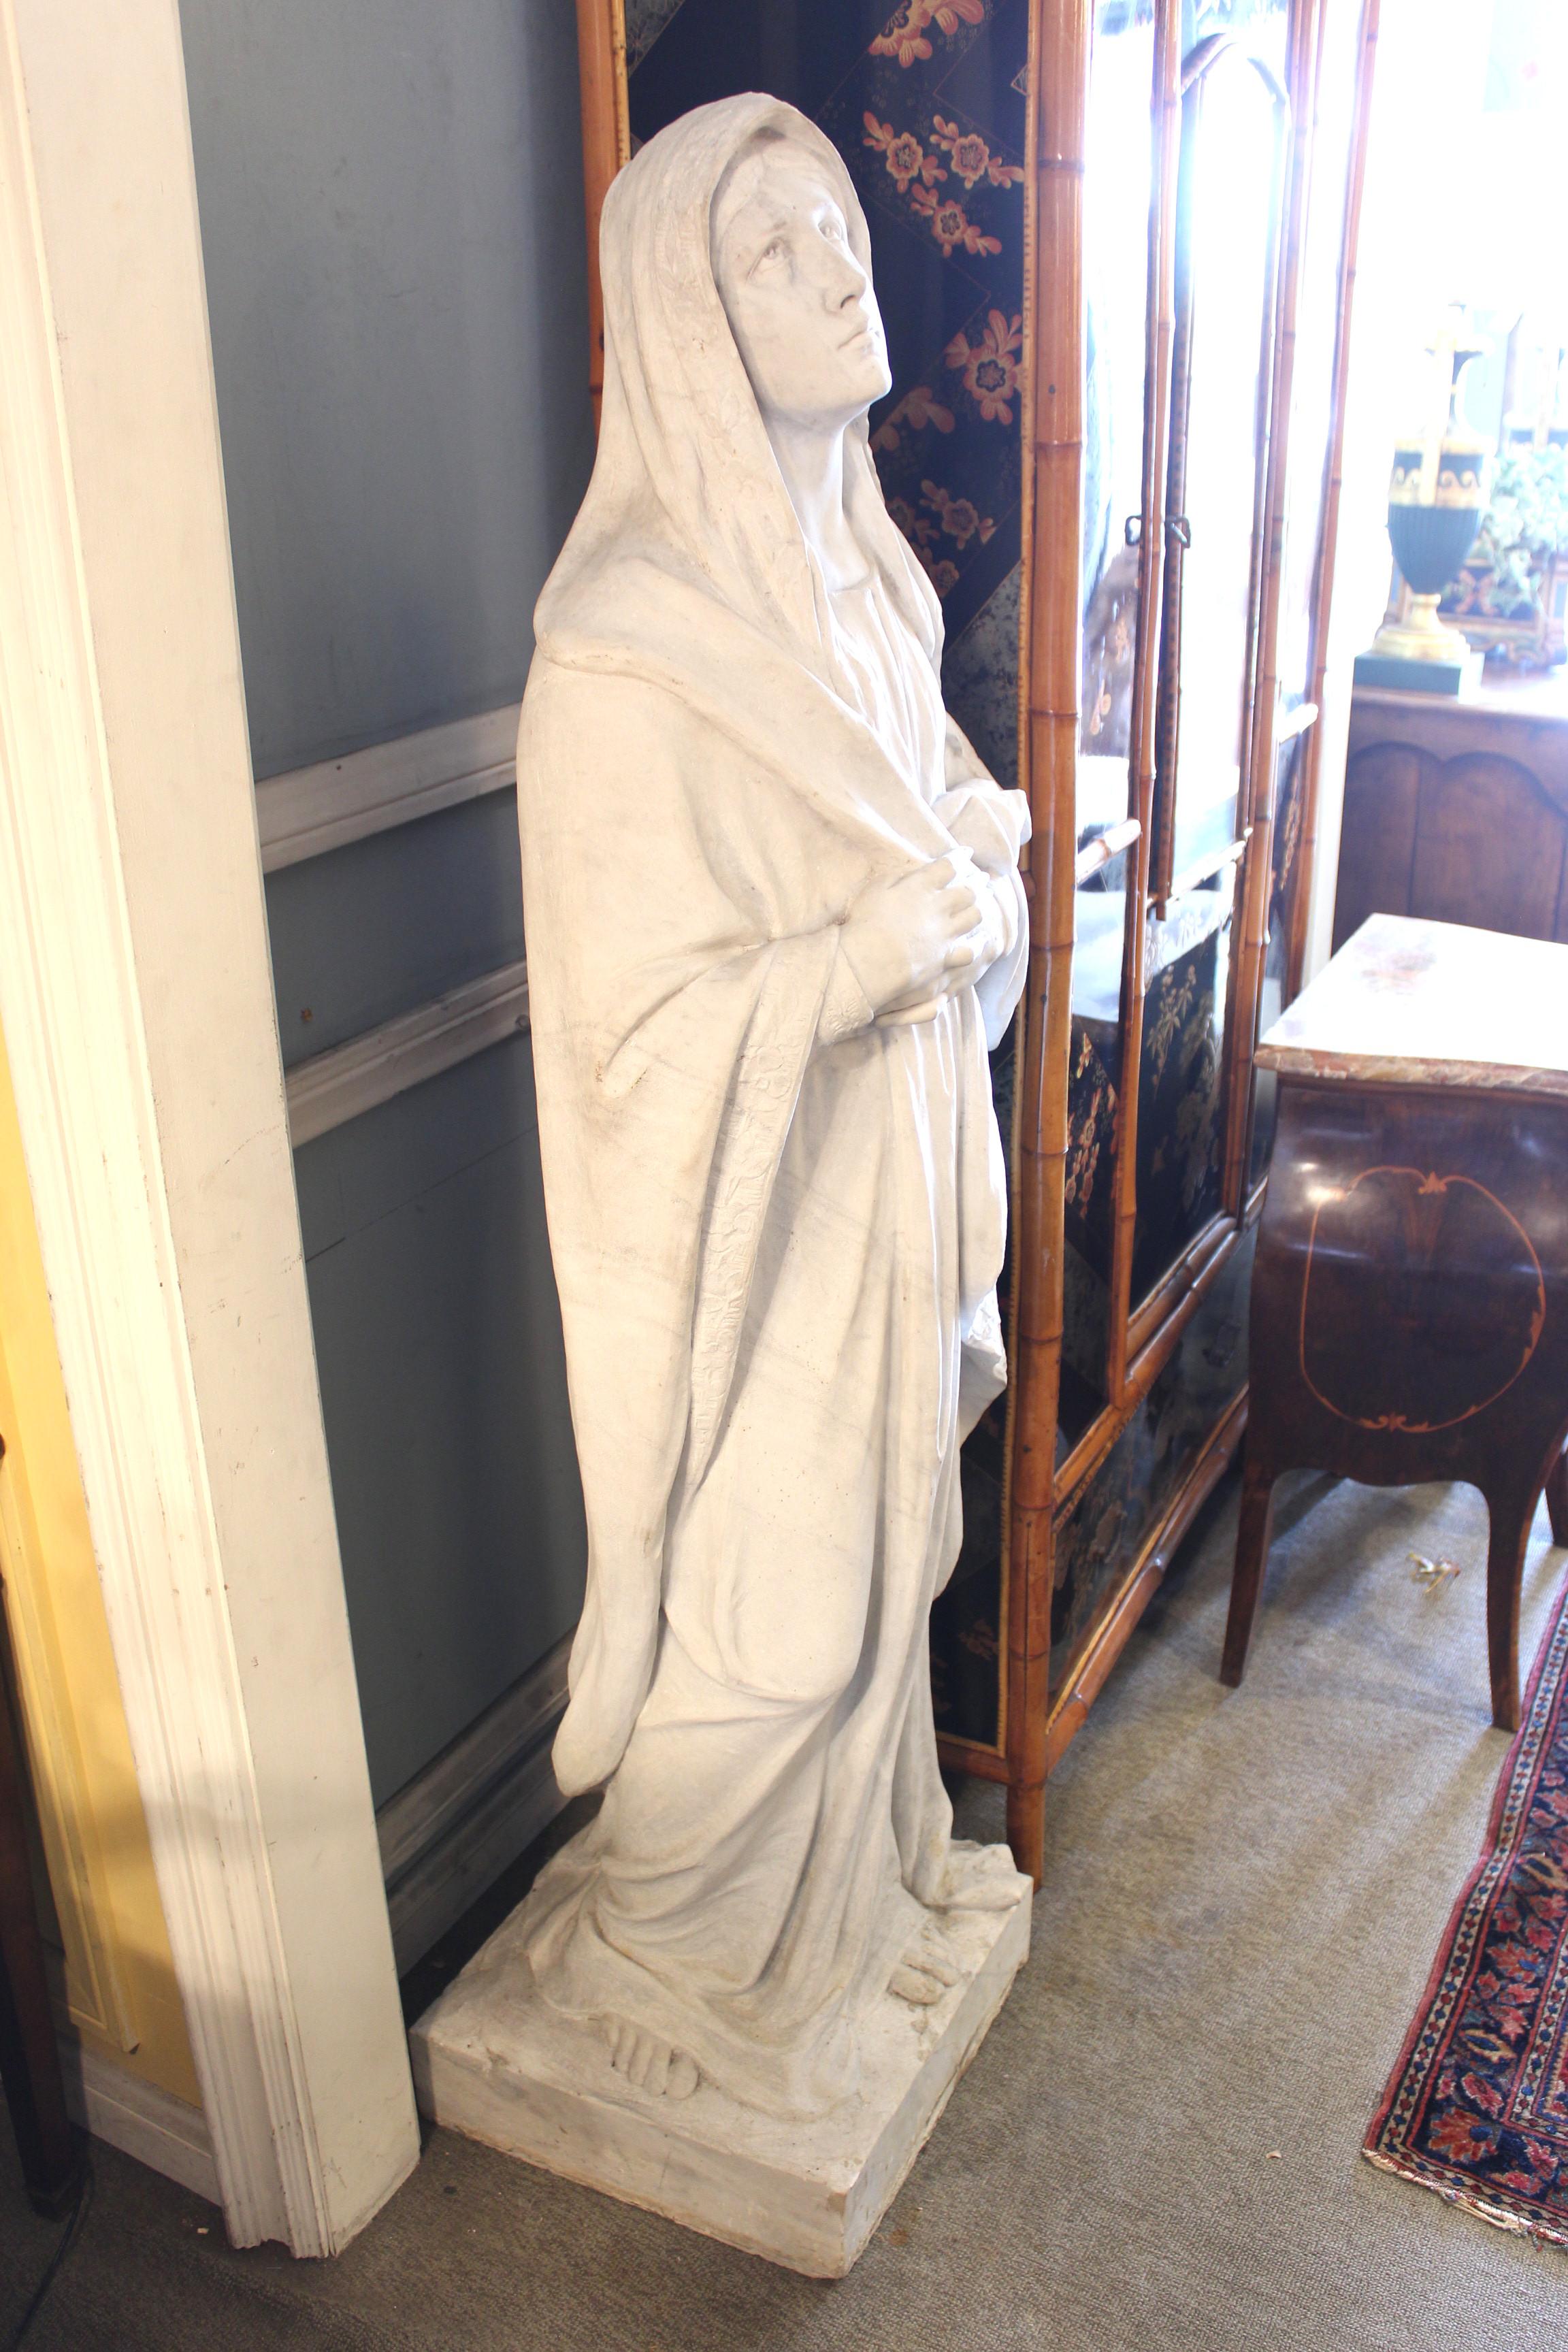 Large white marble statue of The Virgin Mary, early 20th century. This marble statue weighs approximately 300-400 pounds.